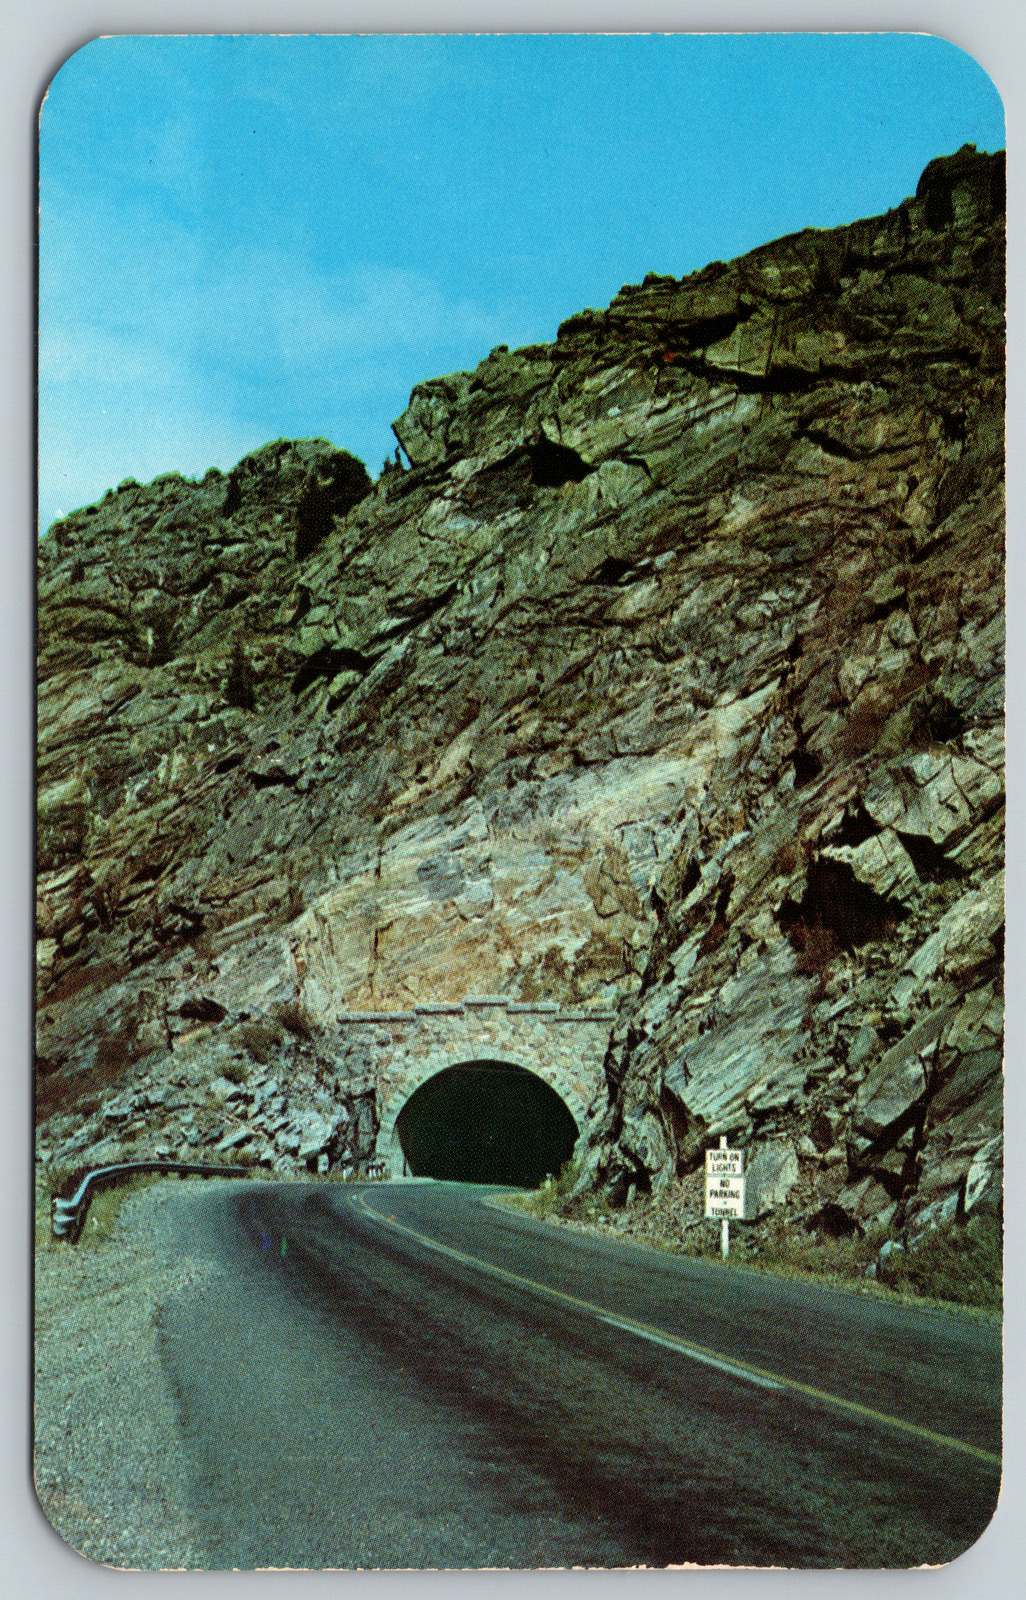 c1960s Tunnel Clear Creek Colorado Canyon Tunnel Vintage Postcard